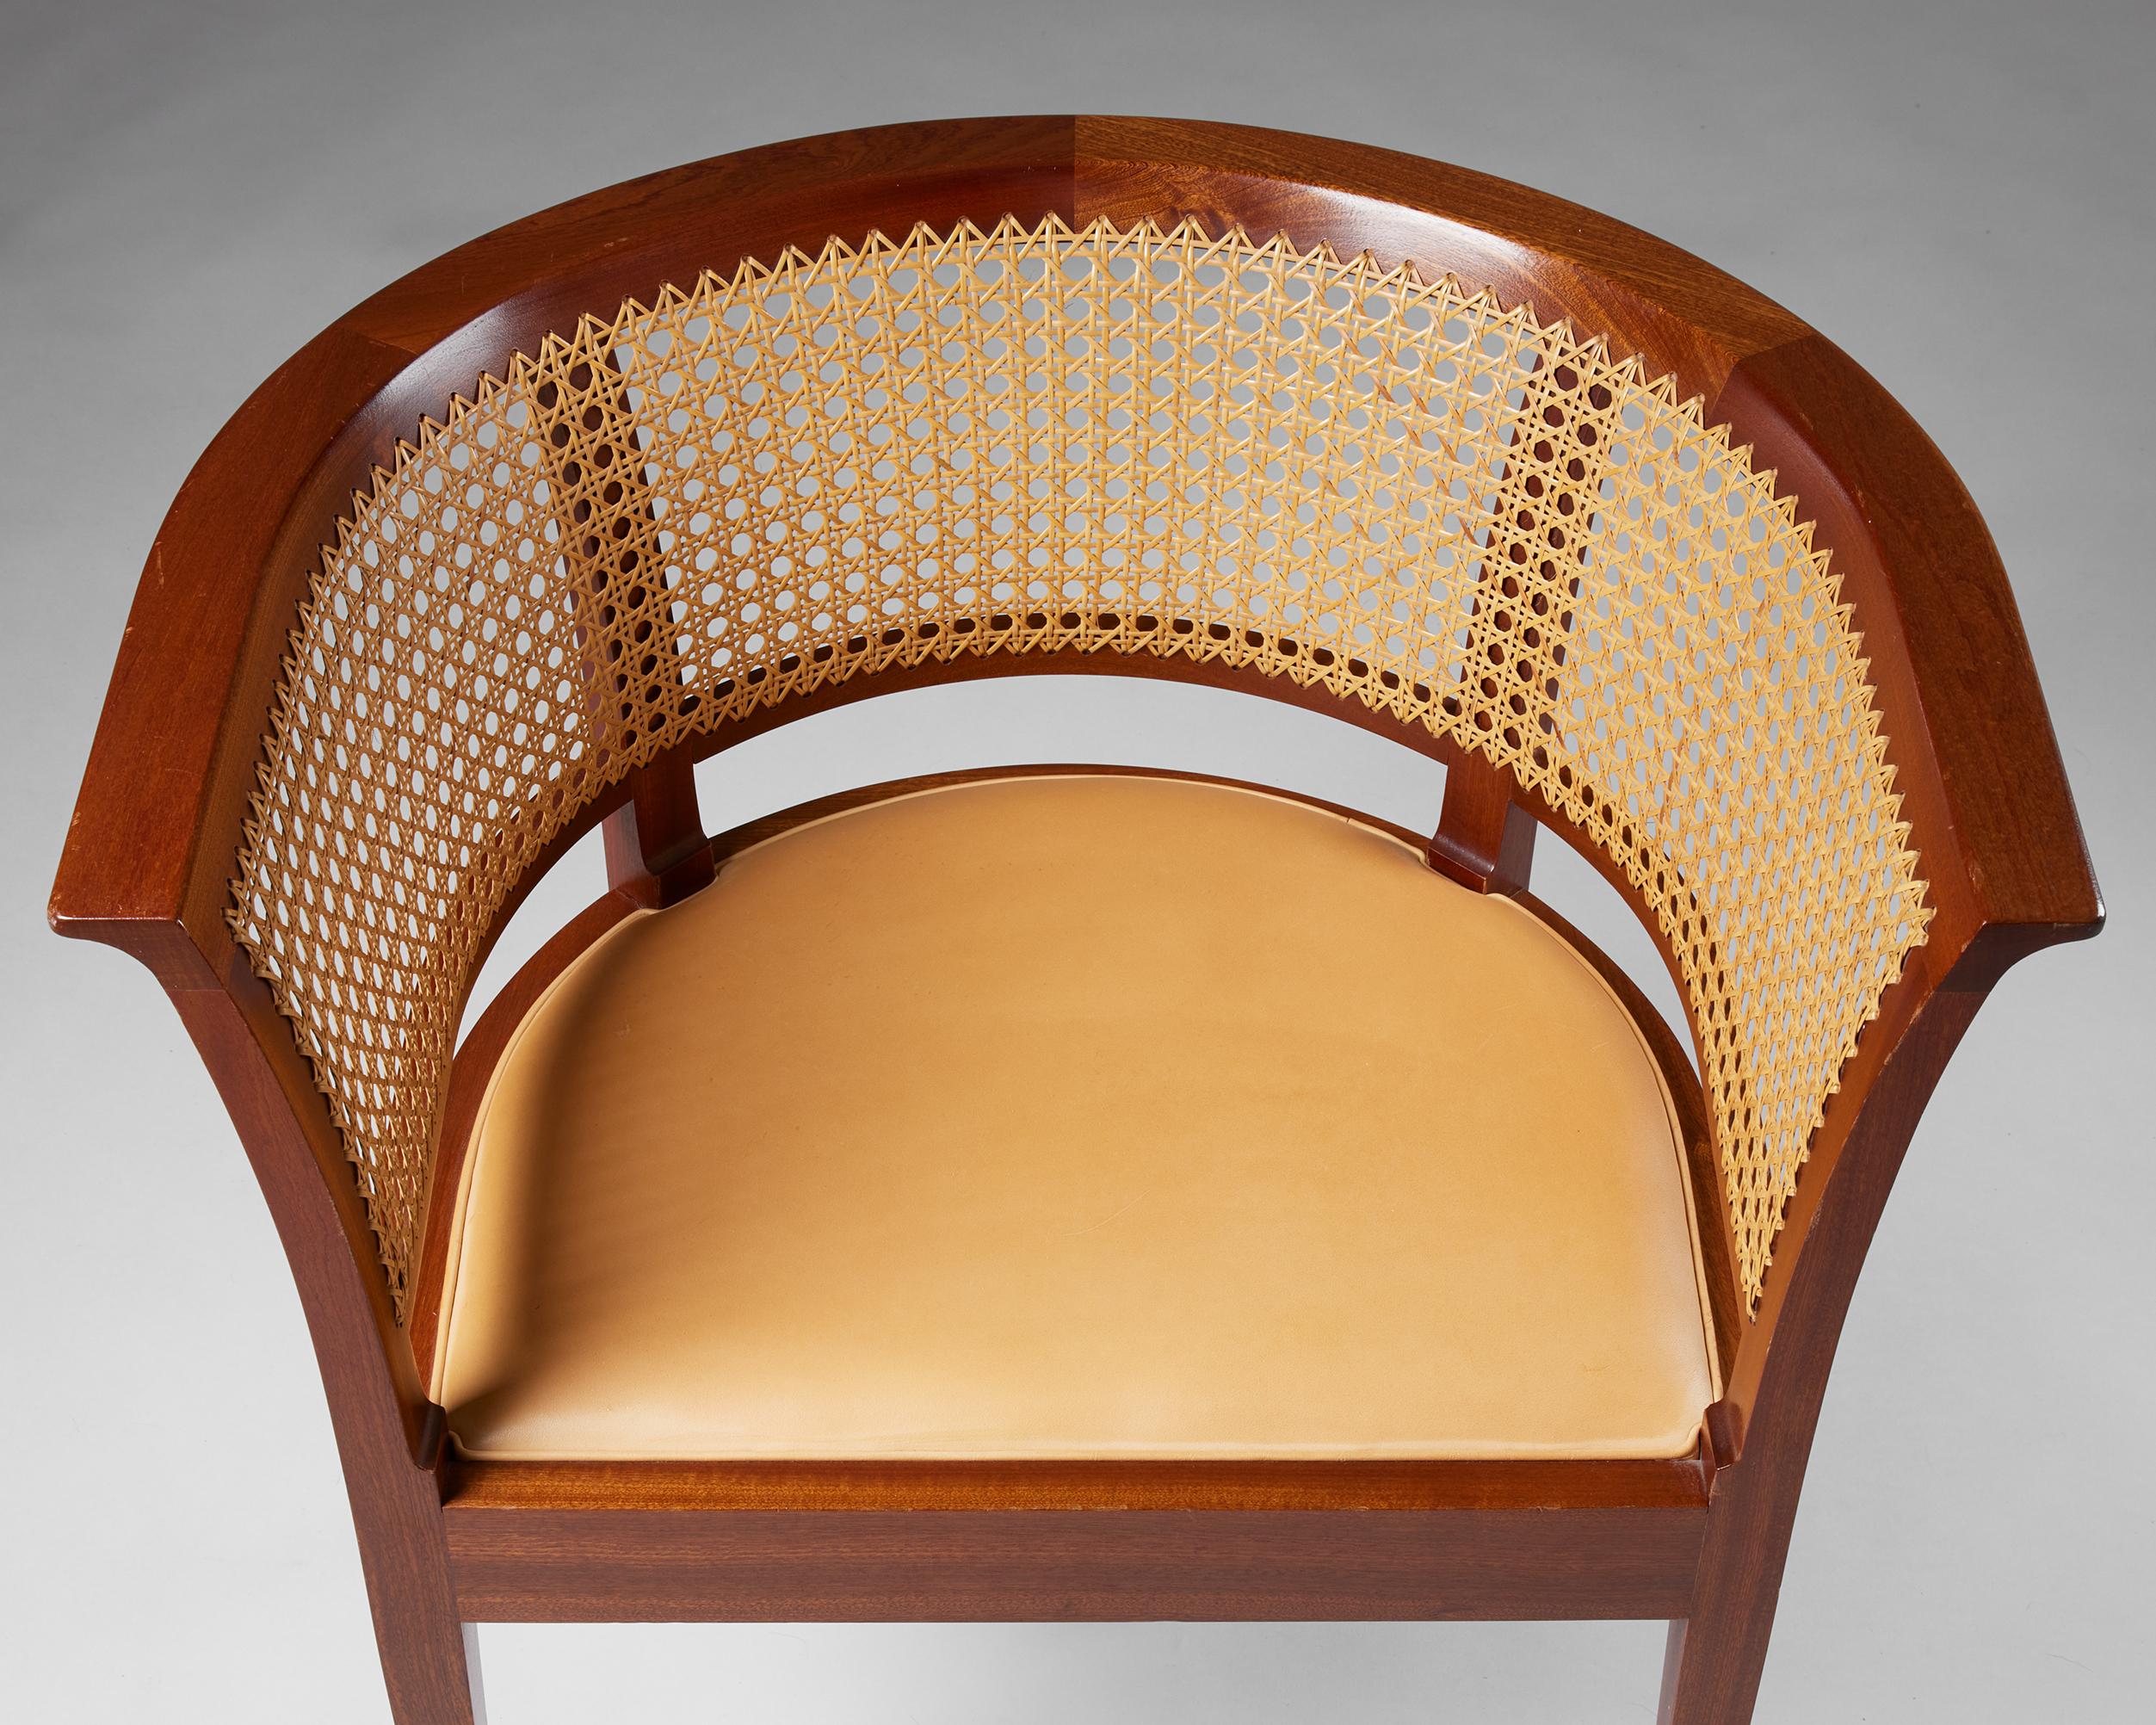 ‘The Faaborg Chair’ designed by Kaare Klint for Rud. Rasmussen Cabinetmakers  For Sale 2